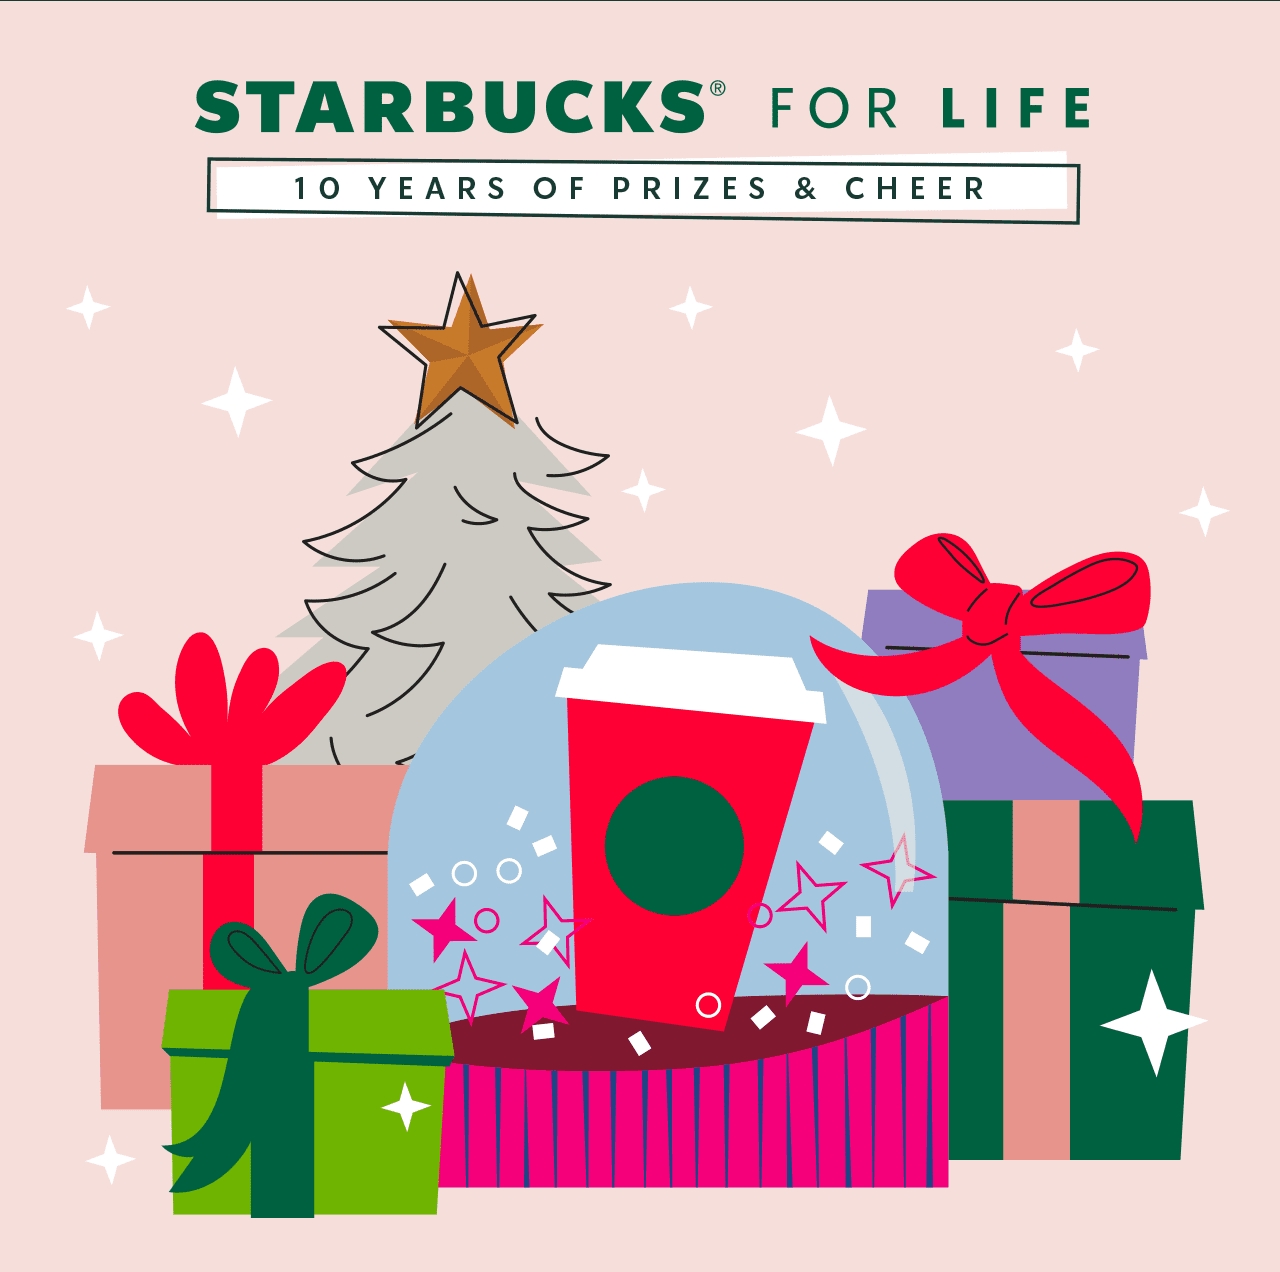 Half Off ANY Handcrafted Drink on at Starbucks Today (November 30th) from 12-6pm